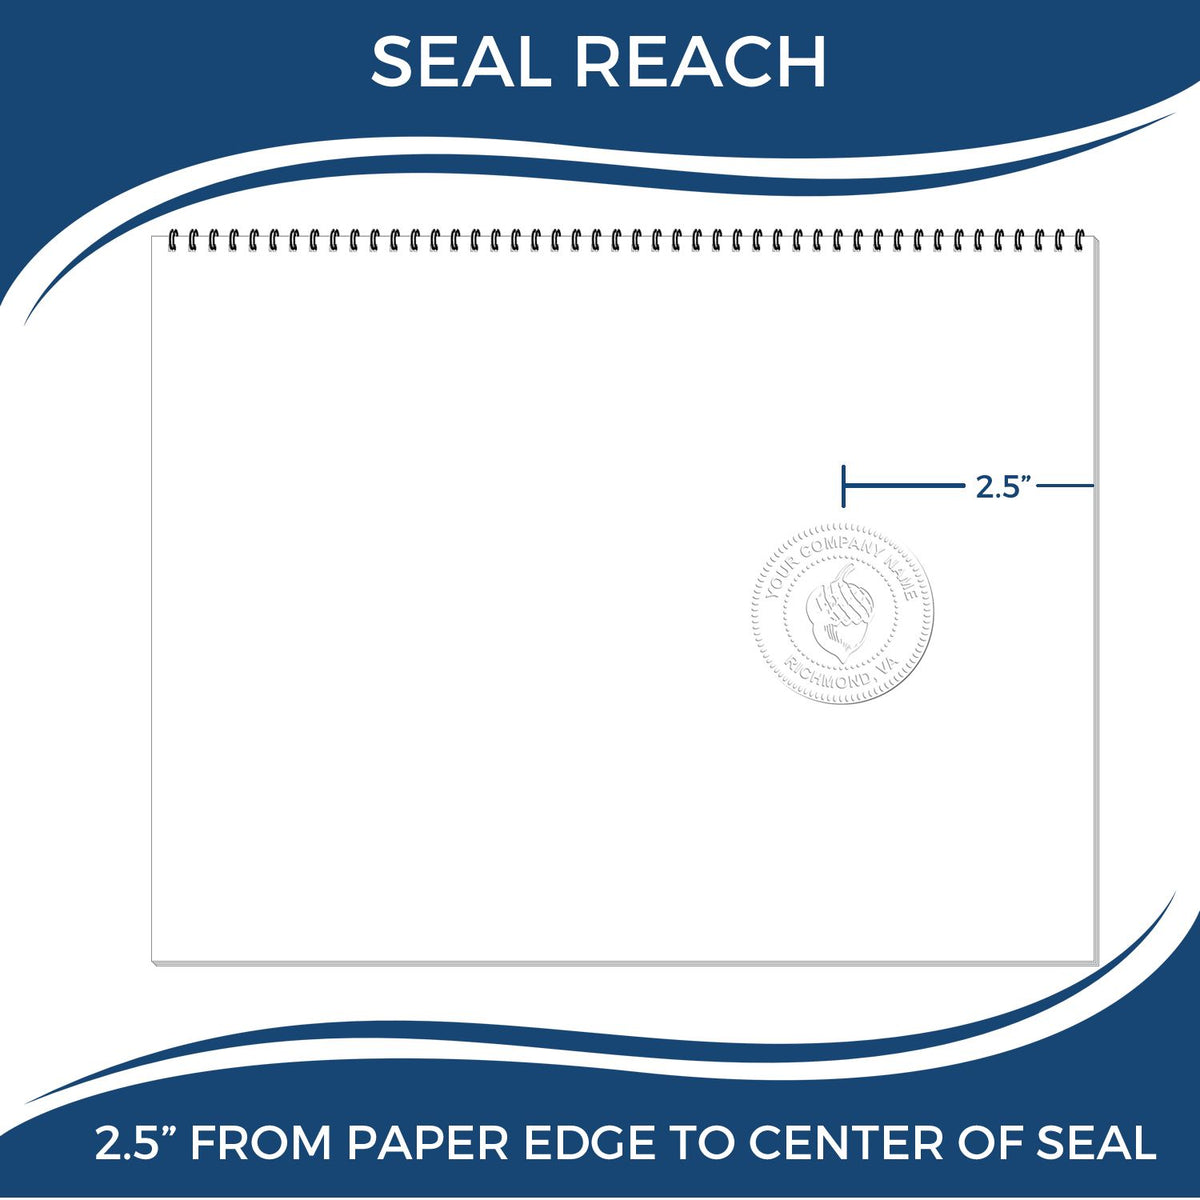 An infographic showing the seal reach which is represented by a ruler and a miniature seal image of the Heavy Duty Cast Iron South Carolina Geologist Seal Embosser